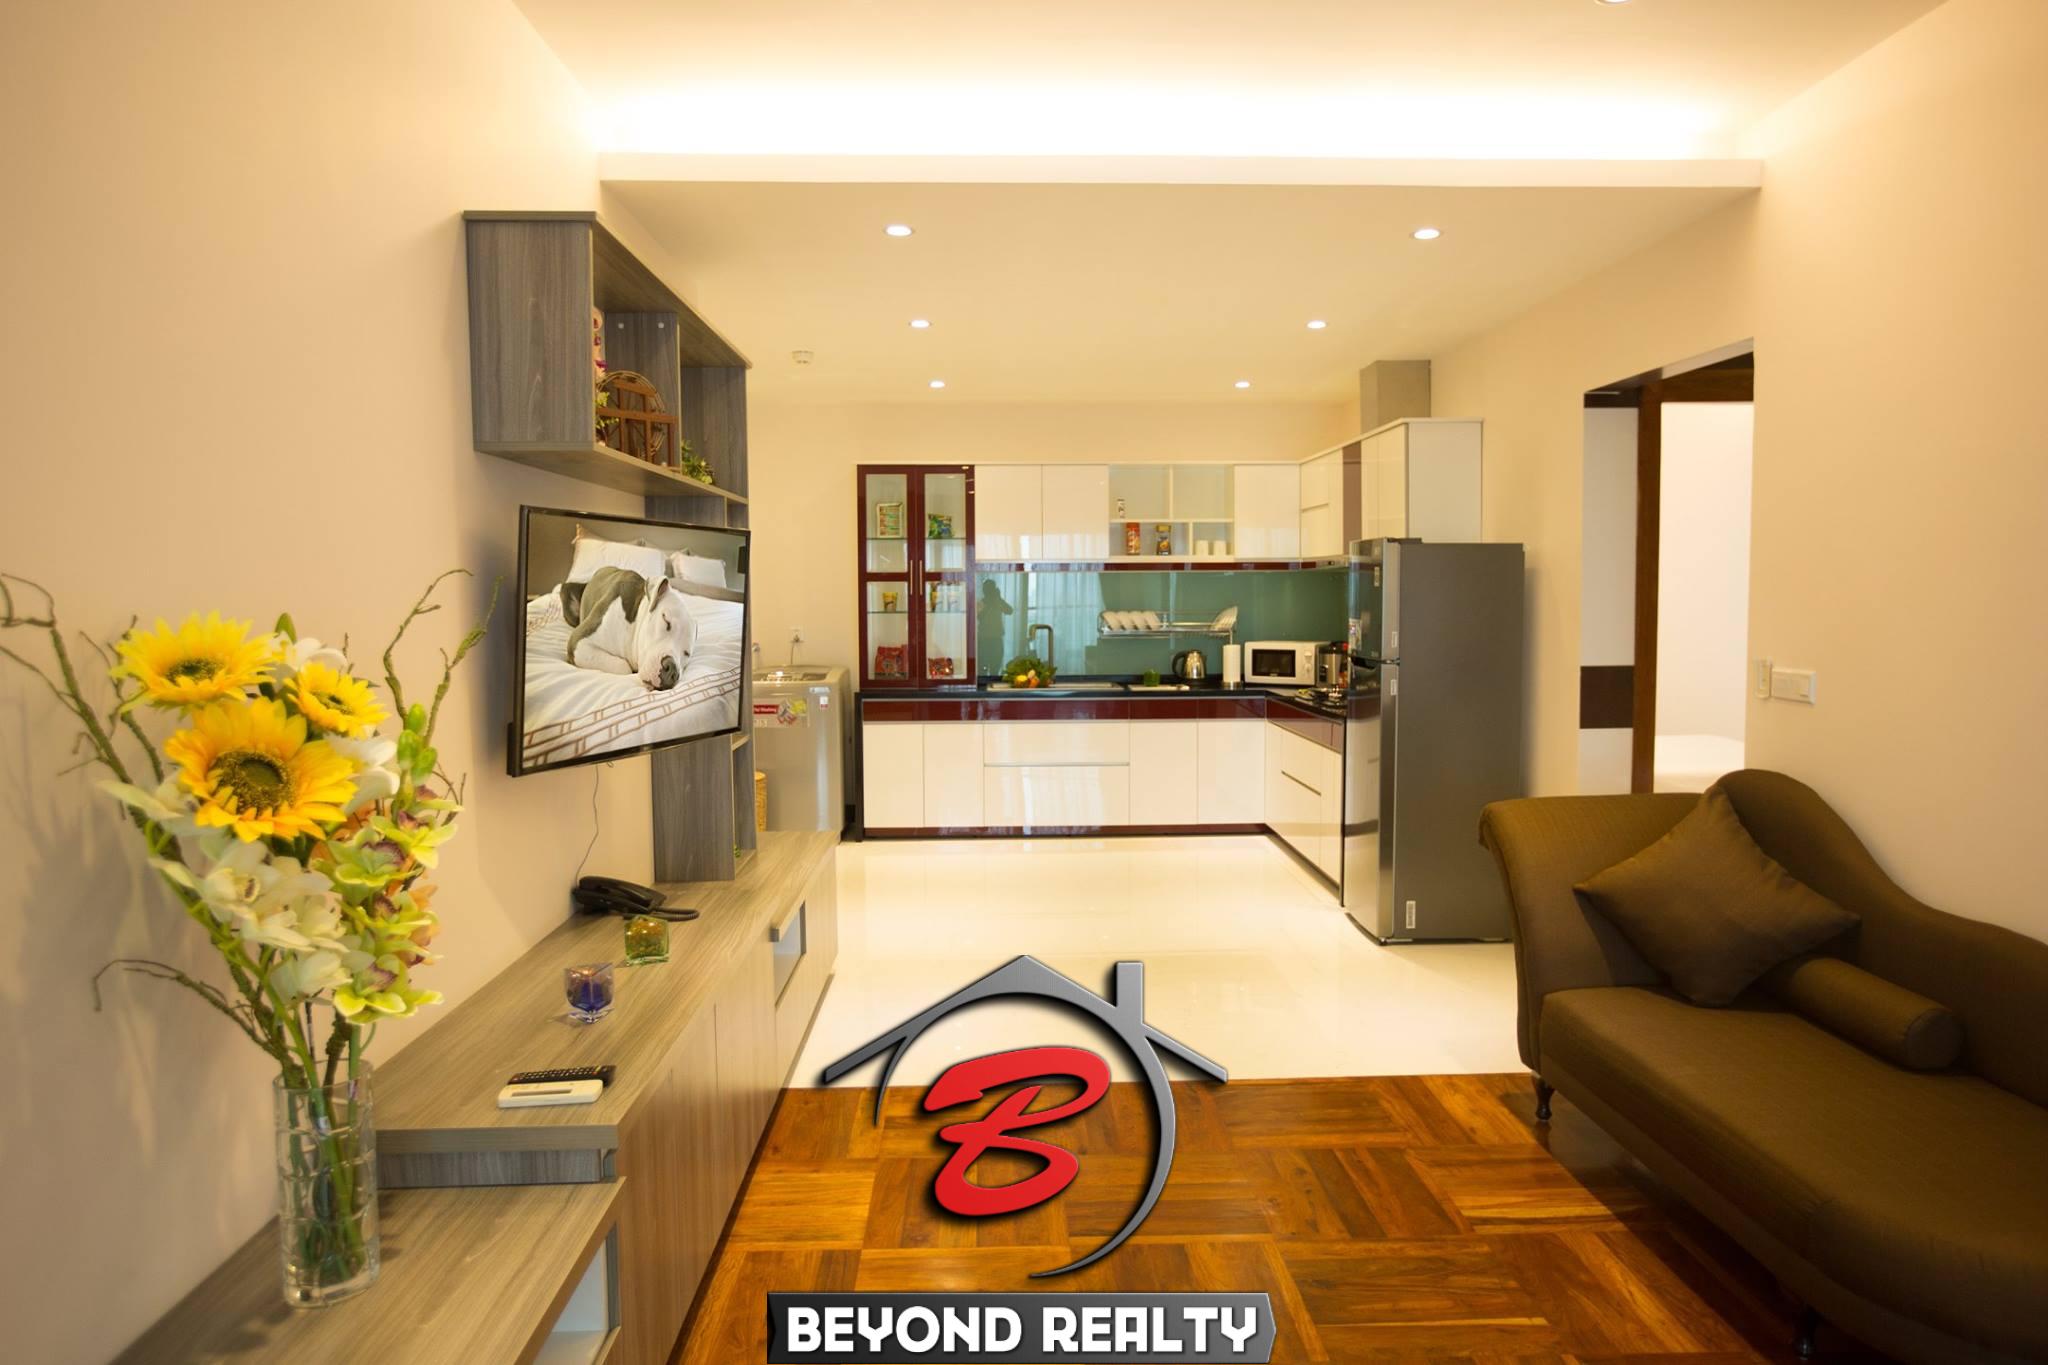 the living room of the 2br luxury apartment for rent in Bkk1 Phnom Penh Cambodia